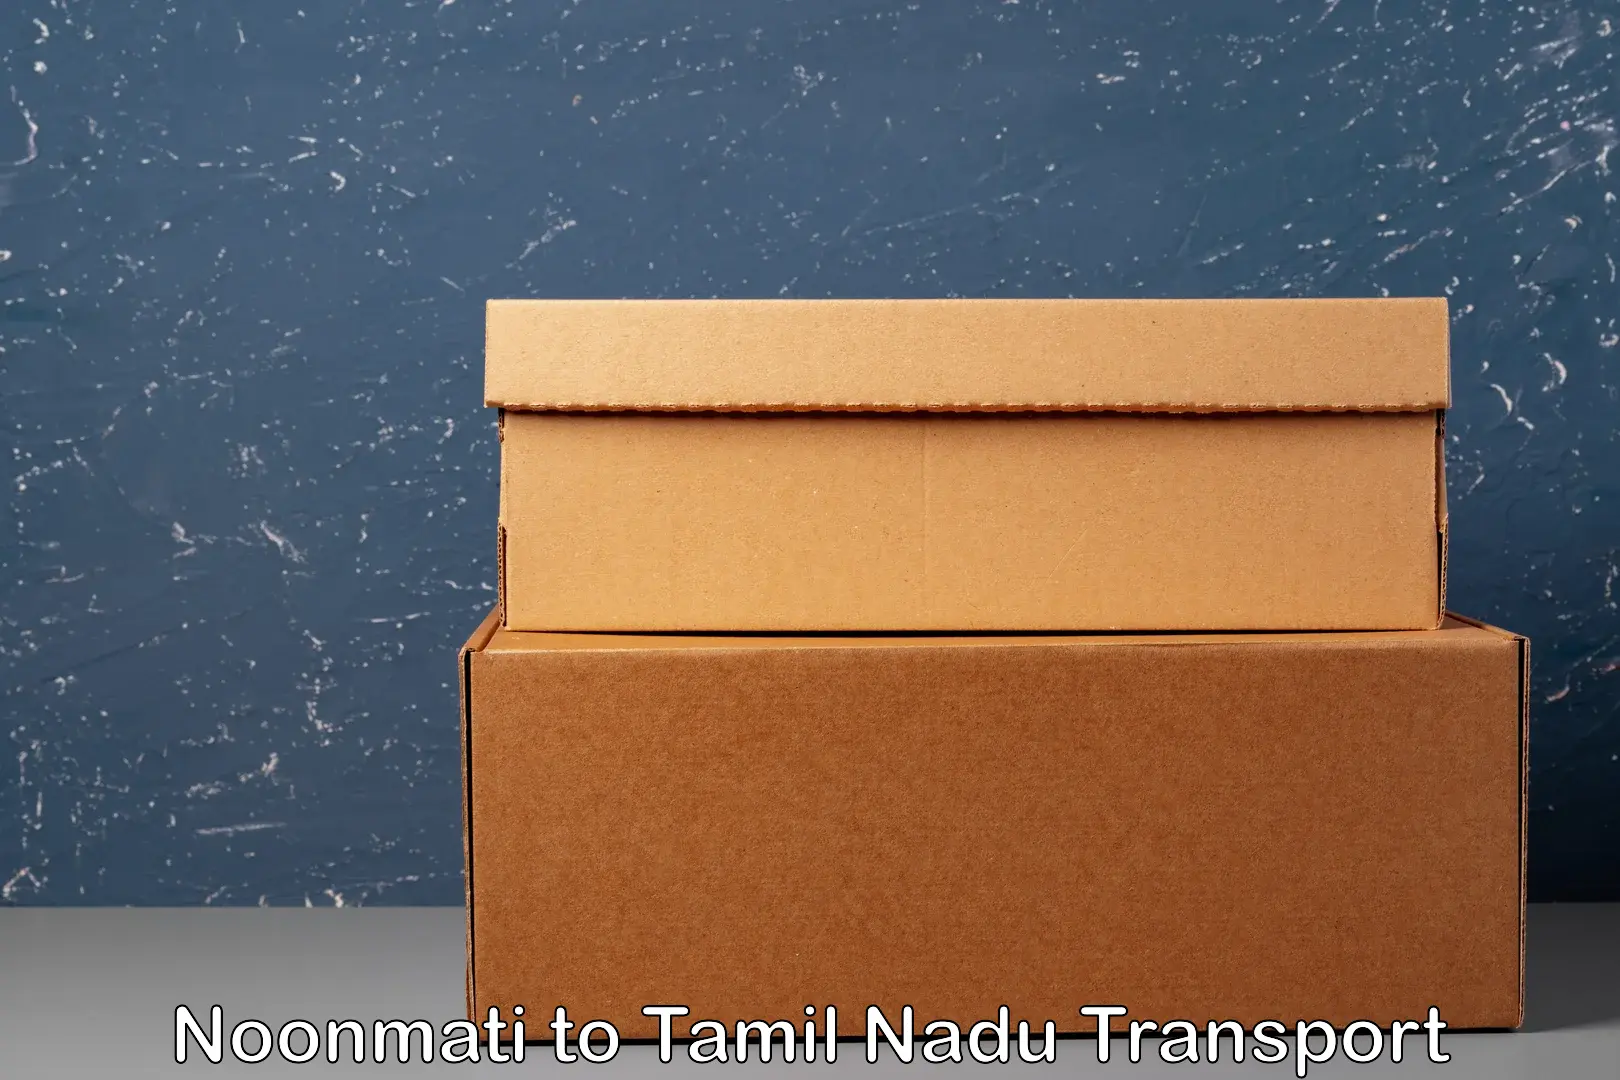 Domestic goods transportation services Noonmati to Tenkasi